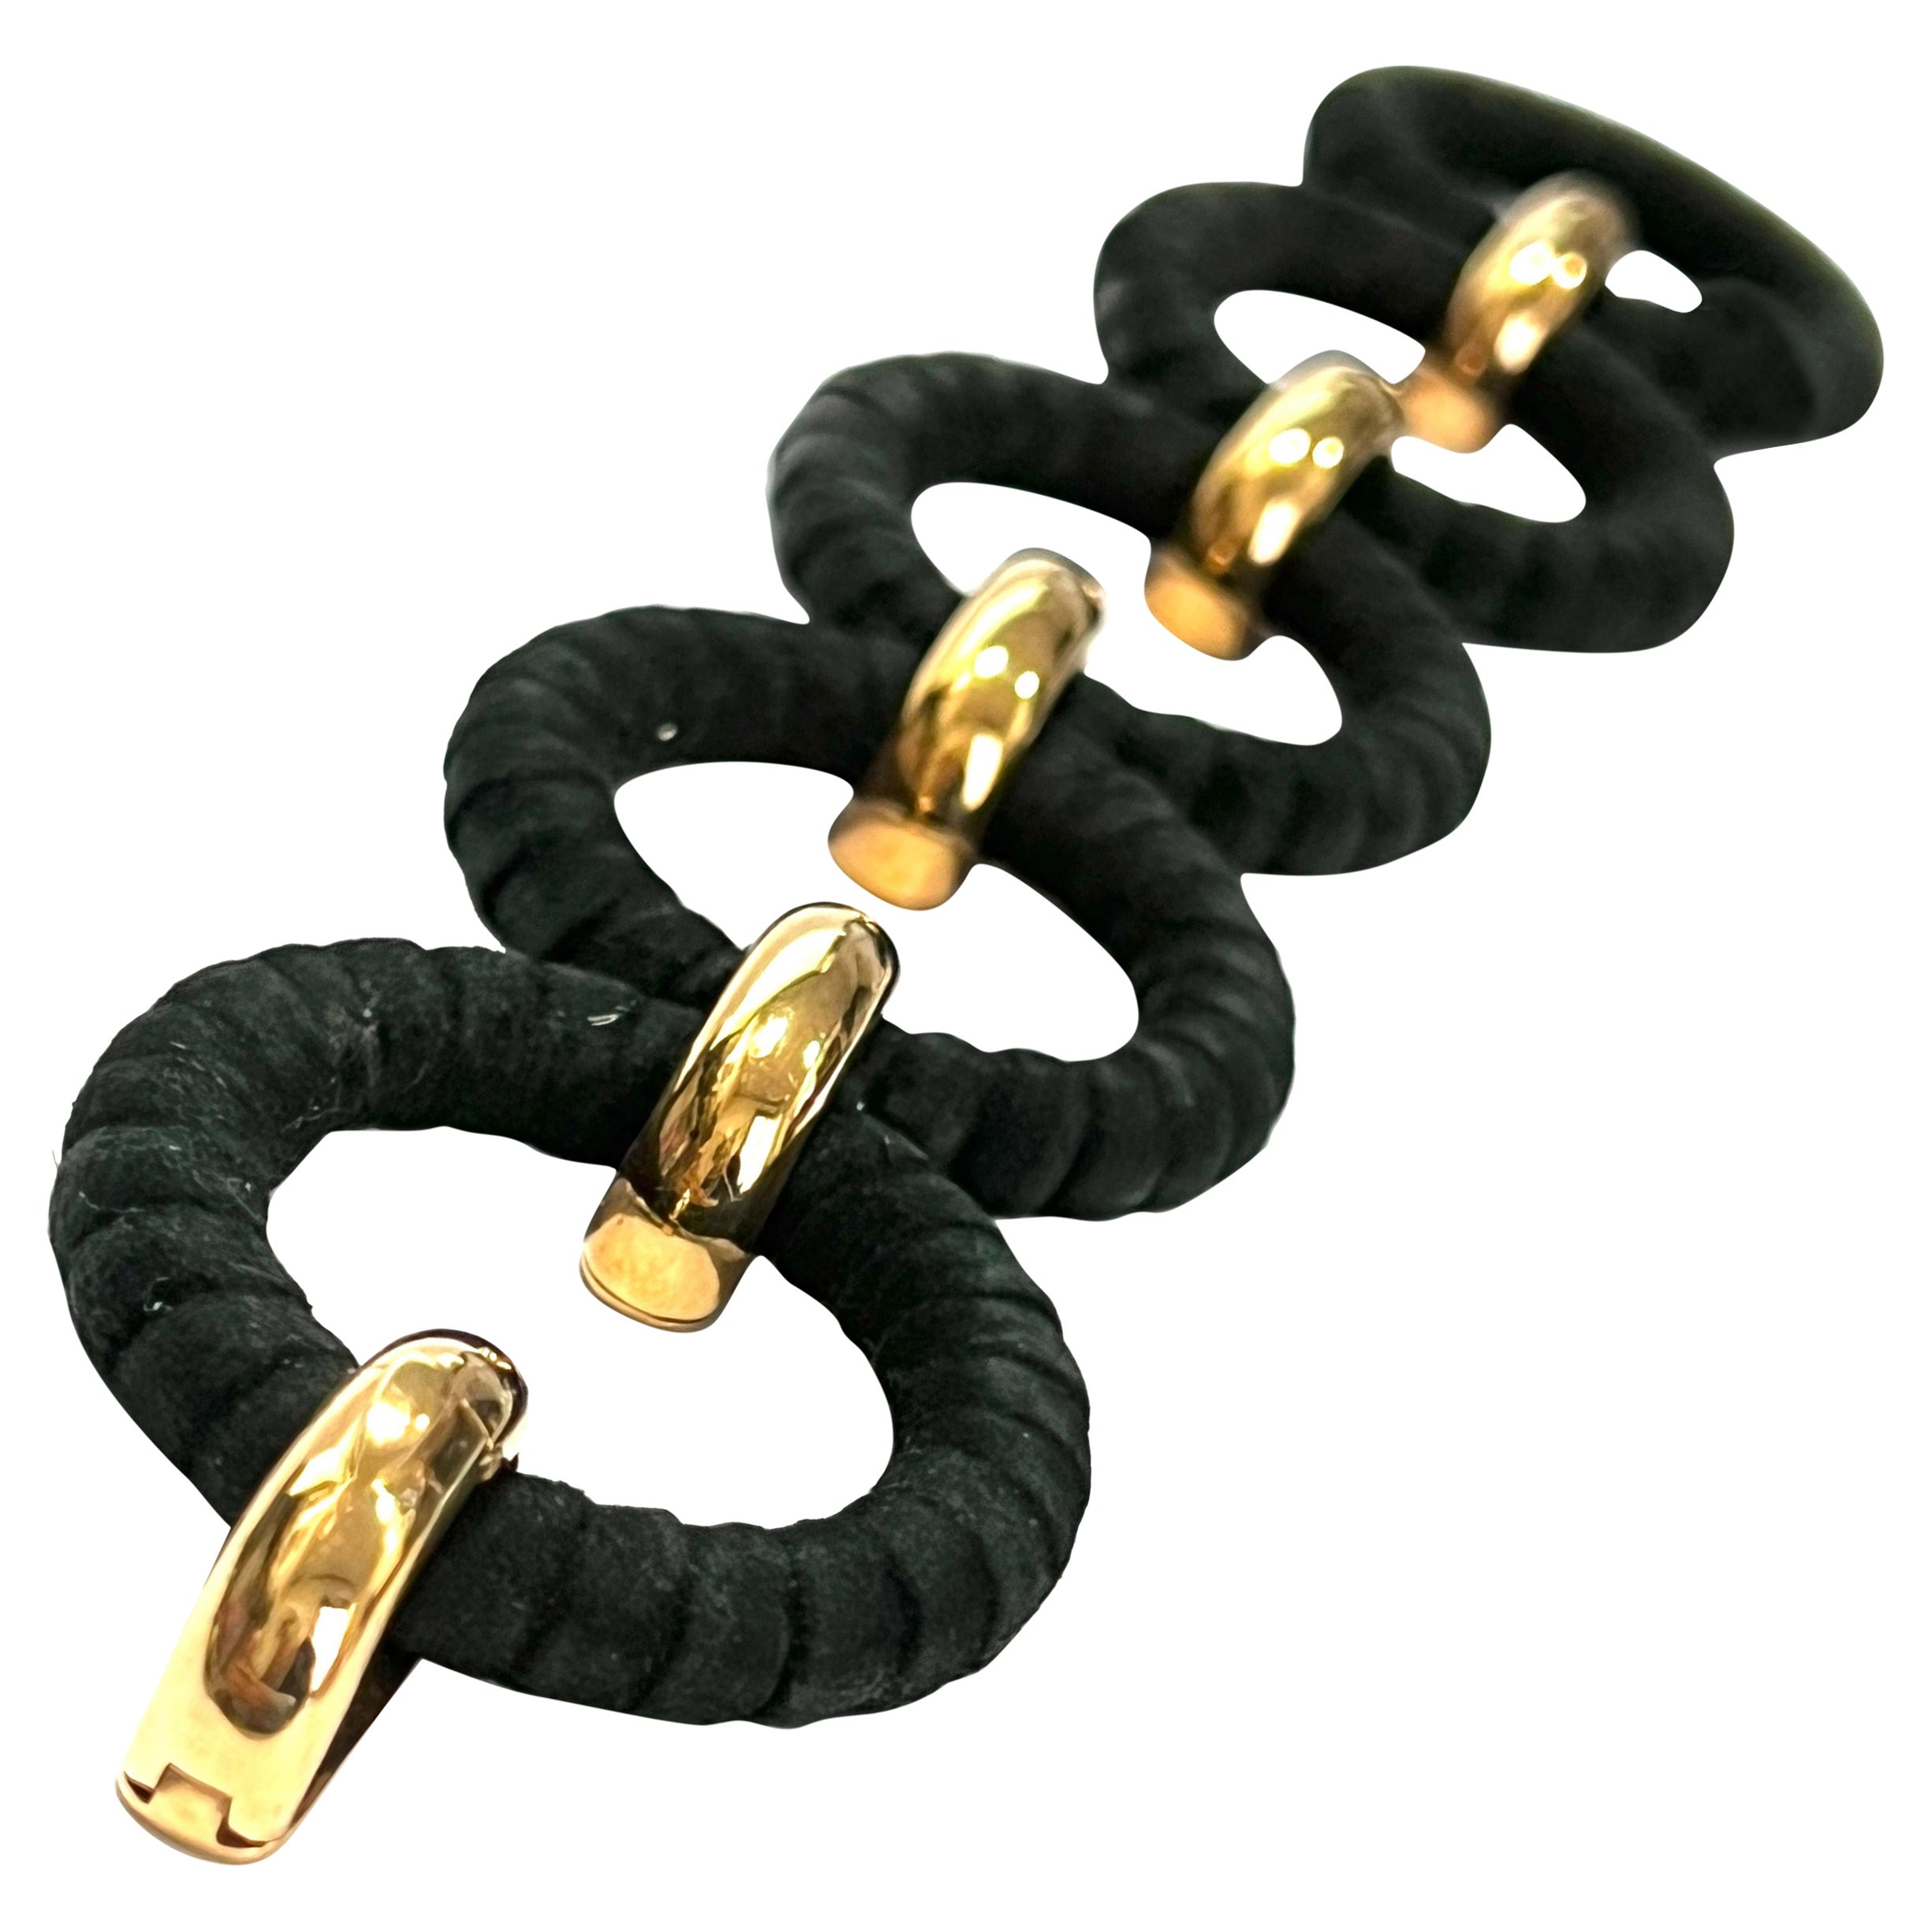 Bracelet with Round Black Leather Links Combined with 18k Rose Gold Links